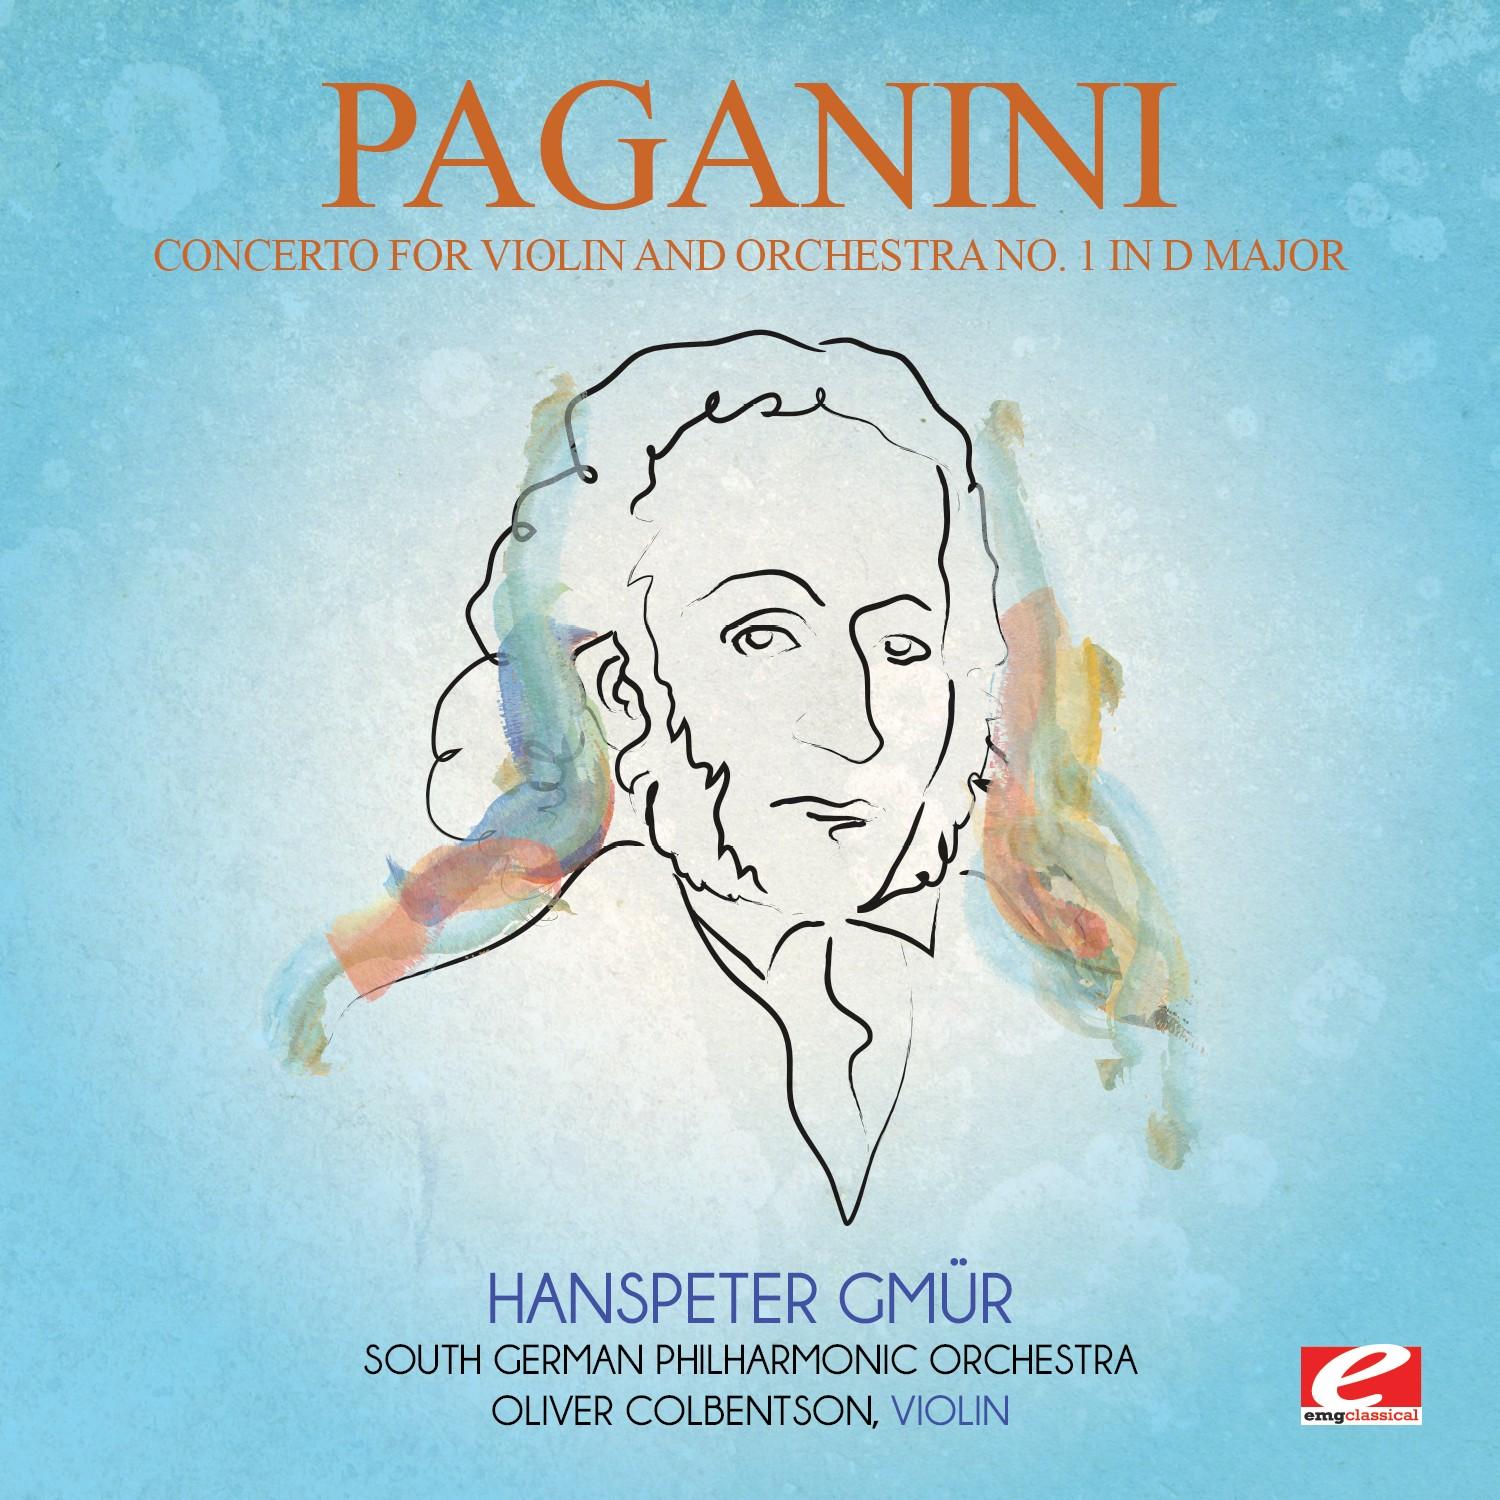 Paganini: Concerto for Violin and Orchestra No. 1 in D Major, Op. 6 (Digitally Remastered)